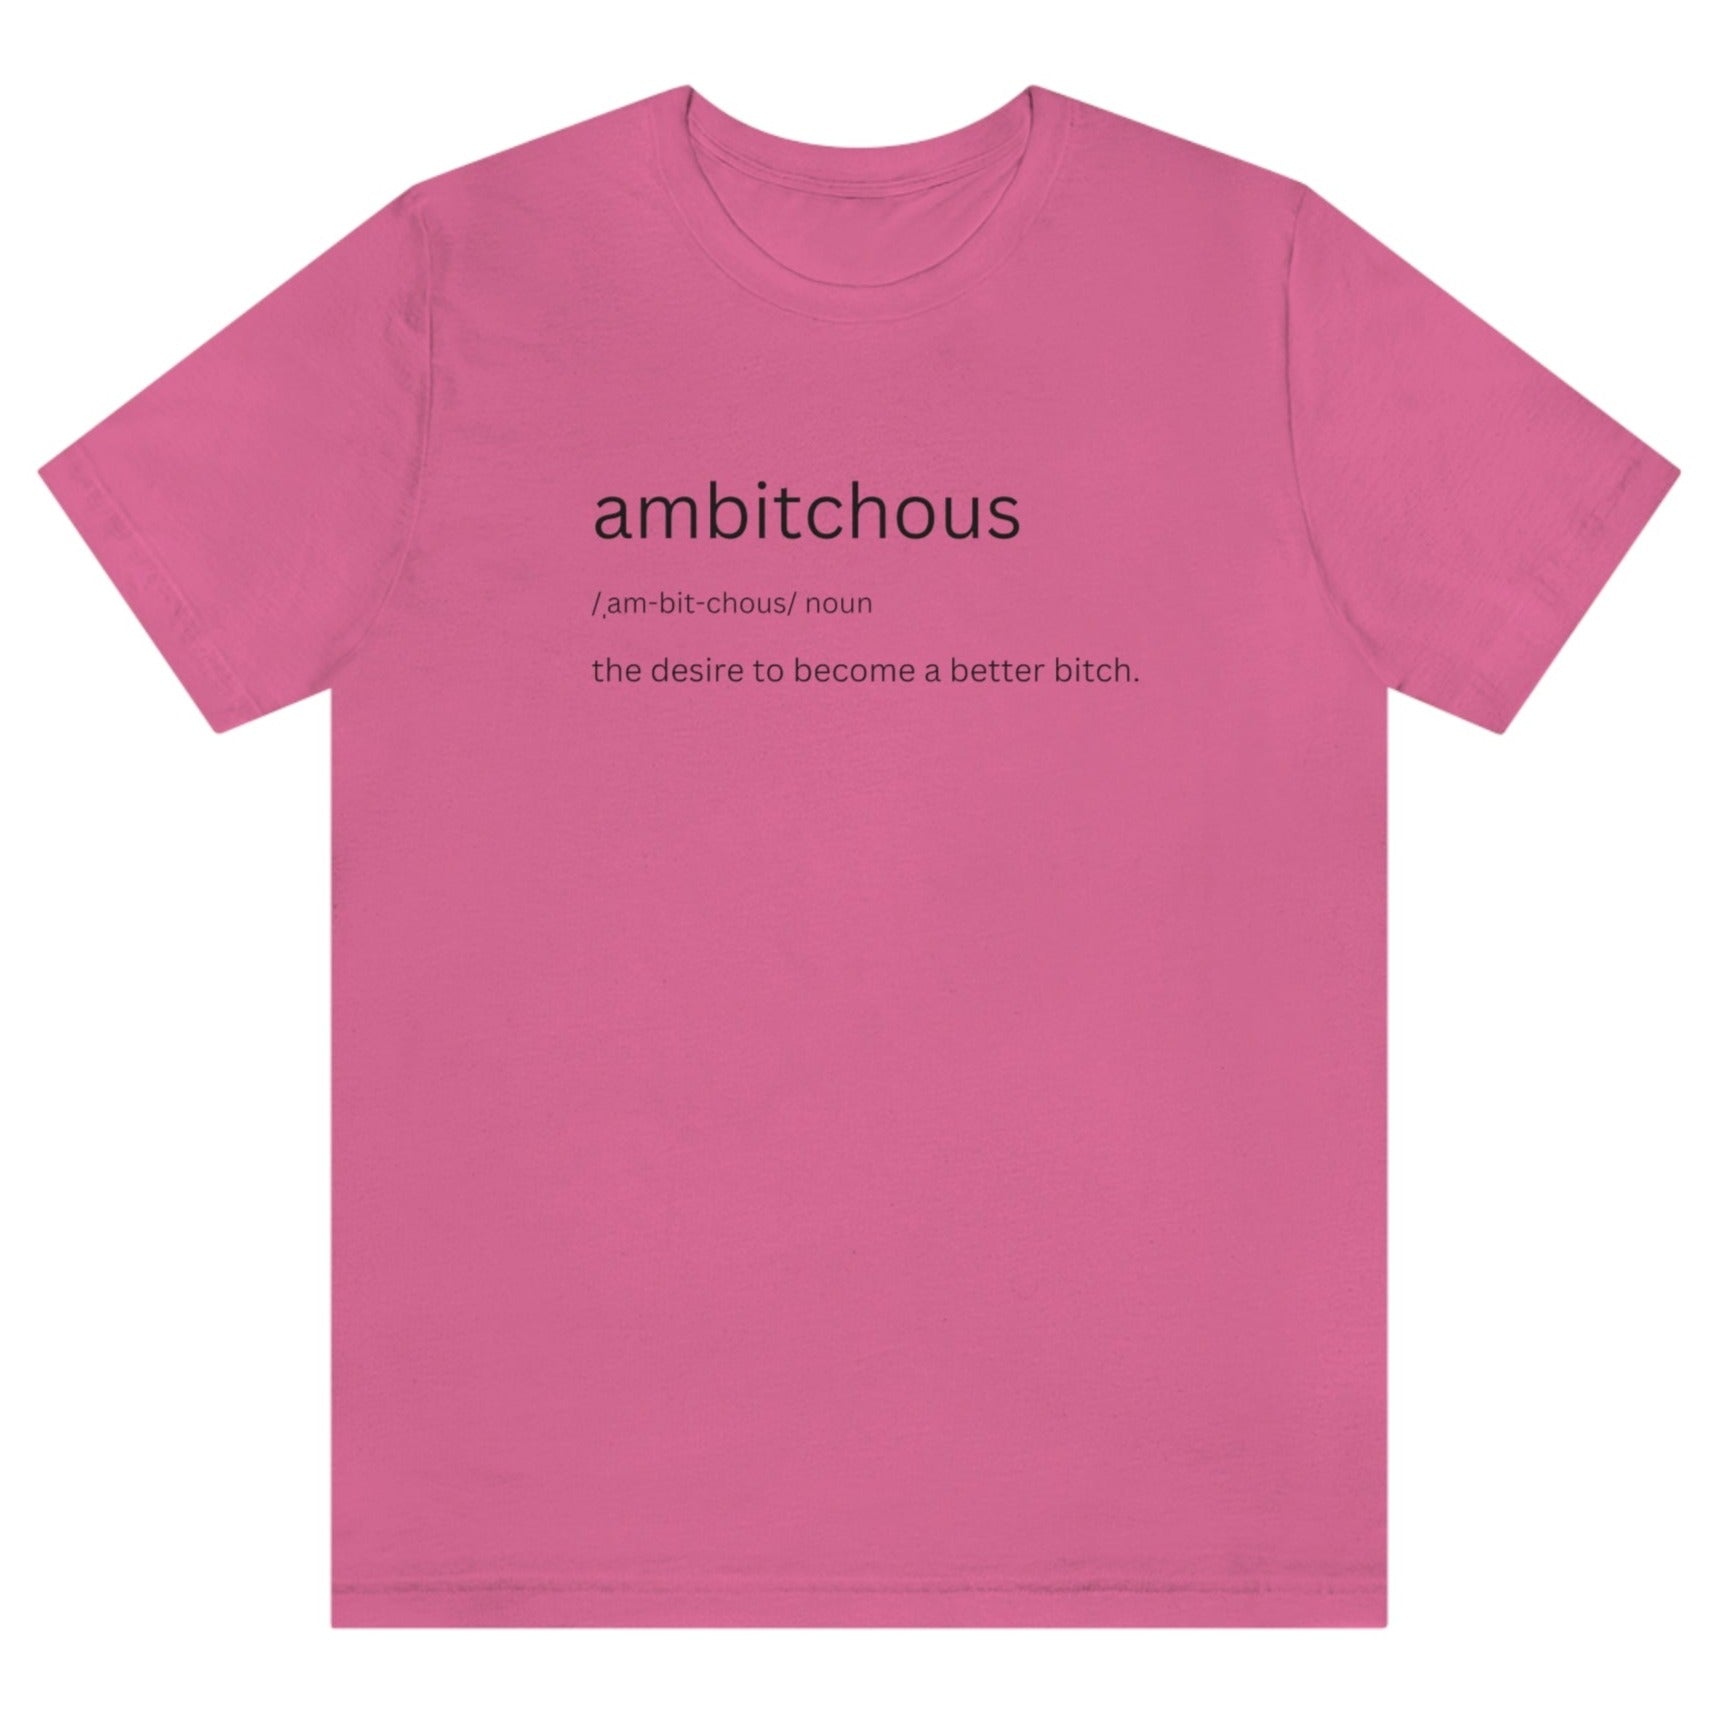 ambitchous-the-desire-to-become-a-better-bitch-charity-pink-t-shirt-womens-funny-definition